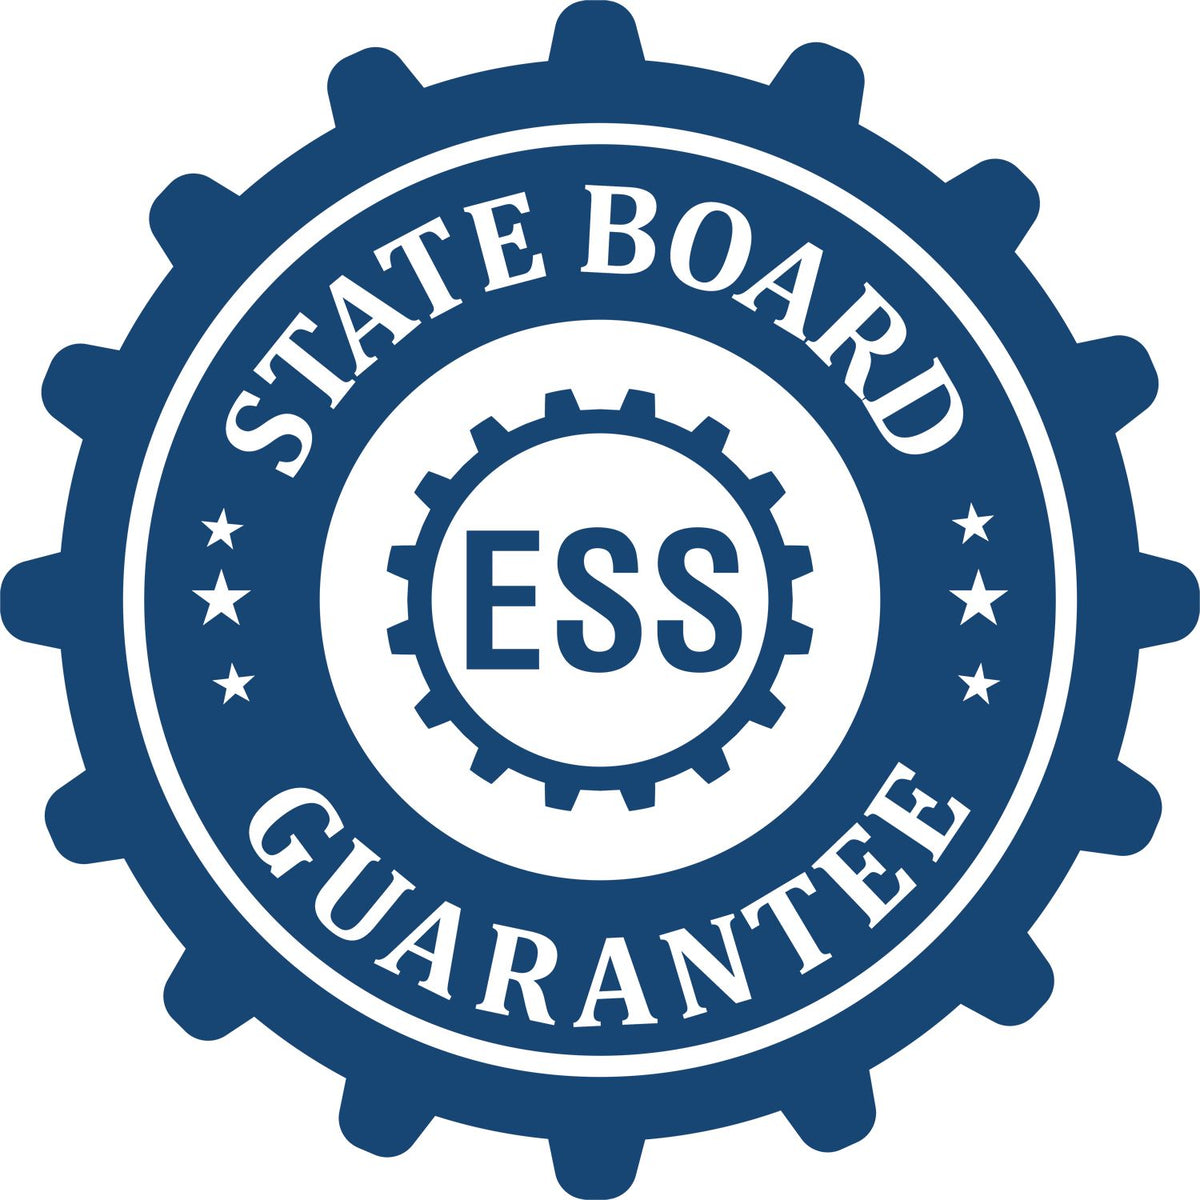 An emblem in a gear shape illustrating a state board guarantee for the Hybrid Vermont Landscape Architect Seal